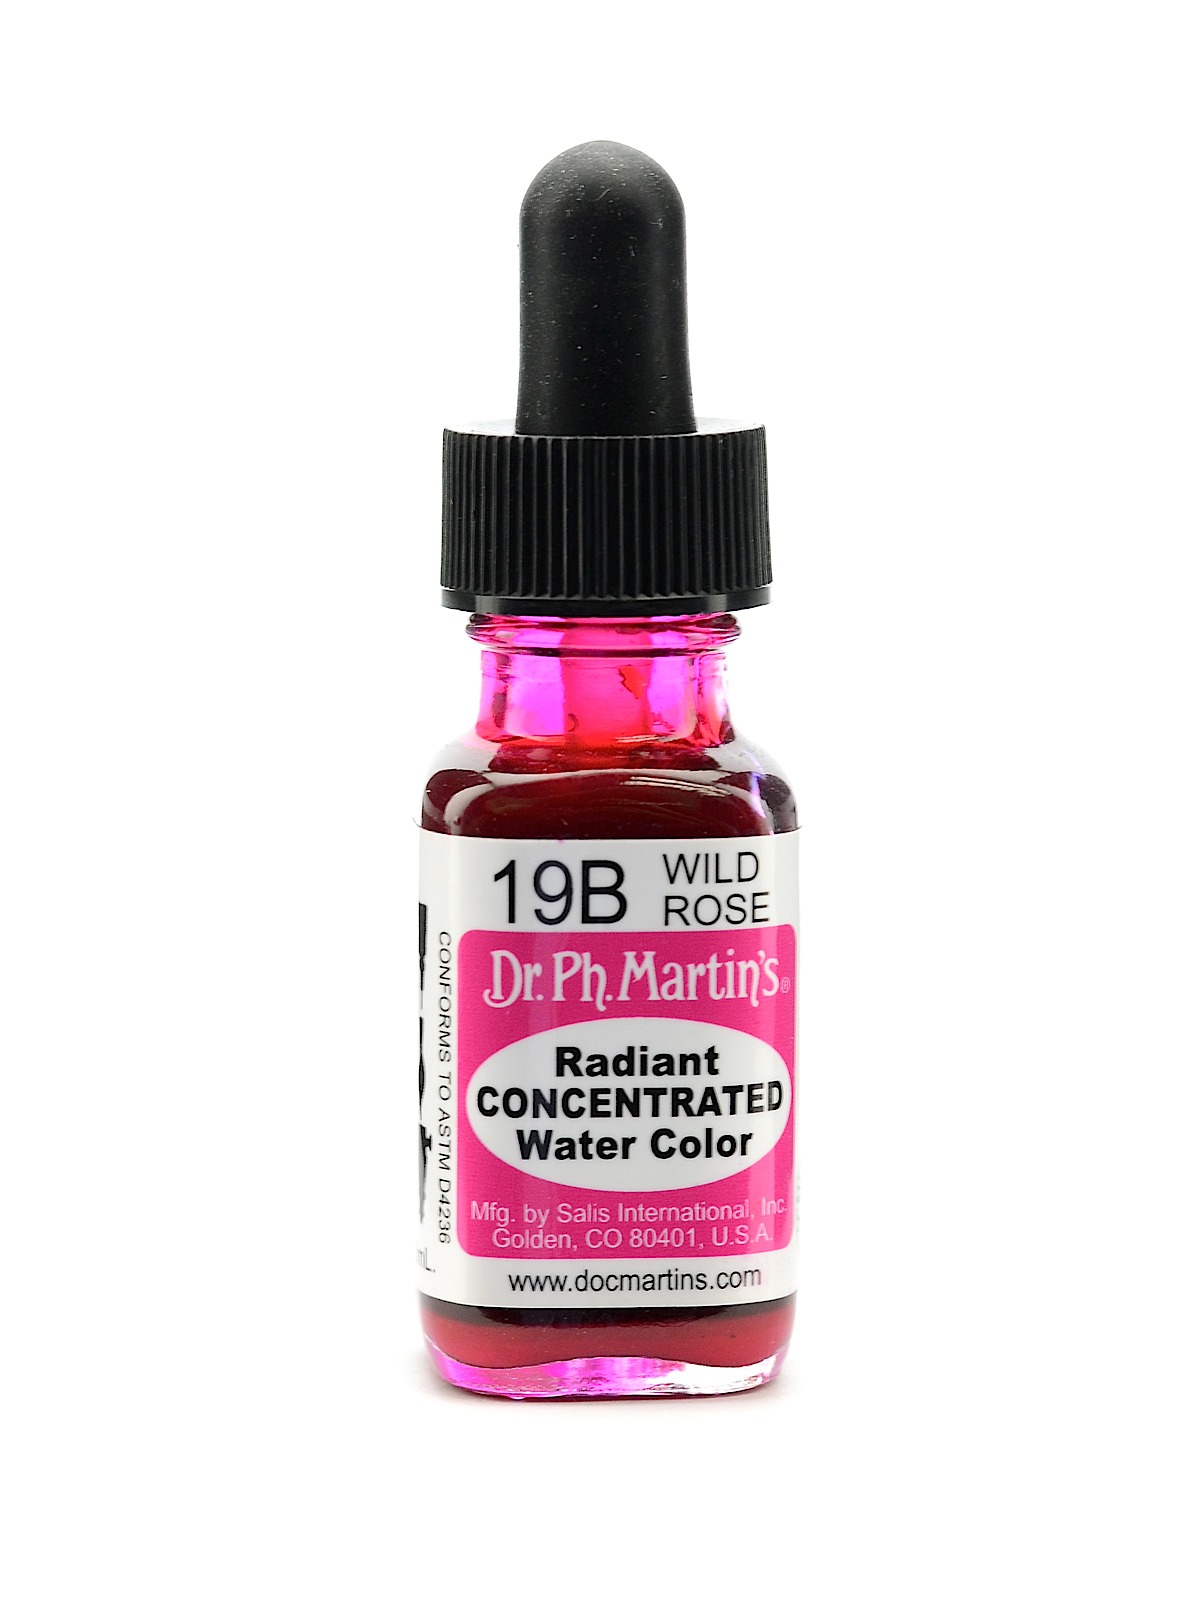 Radiant Concentrated Watercolors Wild Rose 1 2 Oz.